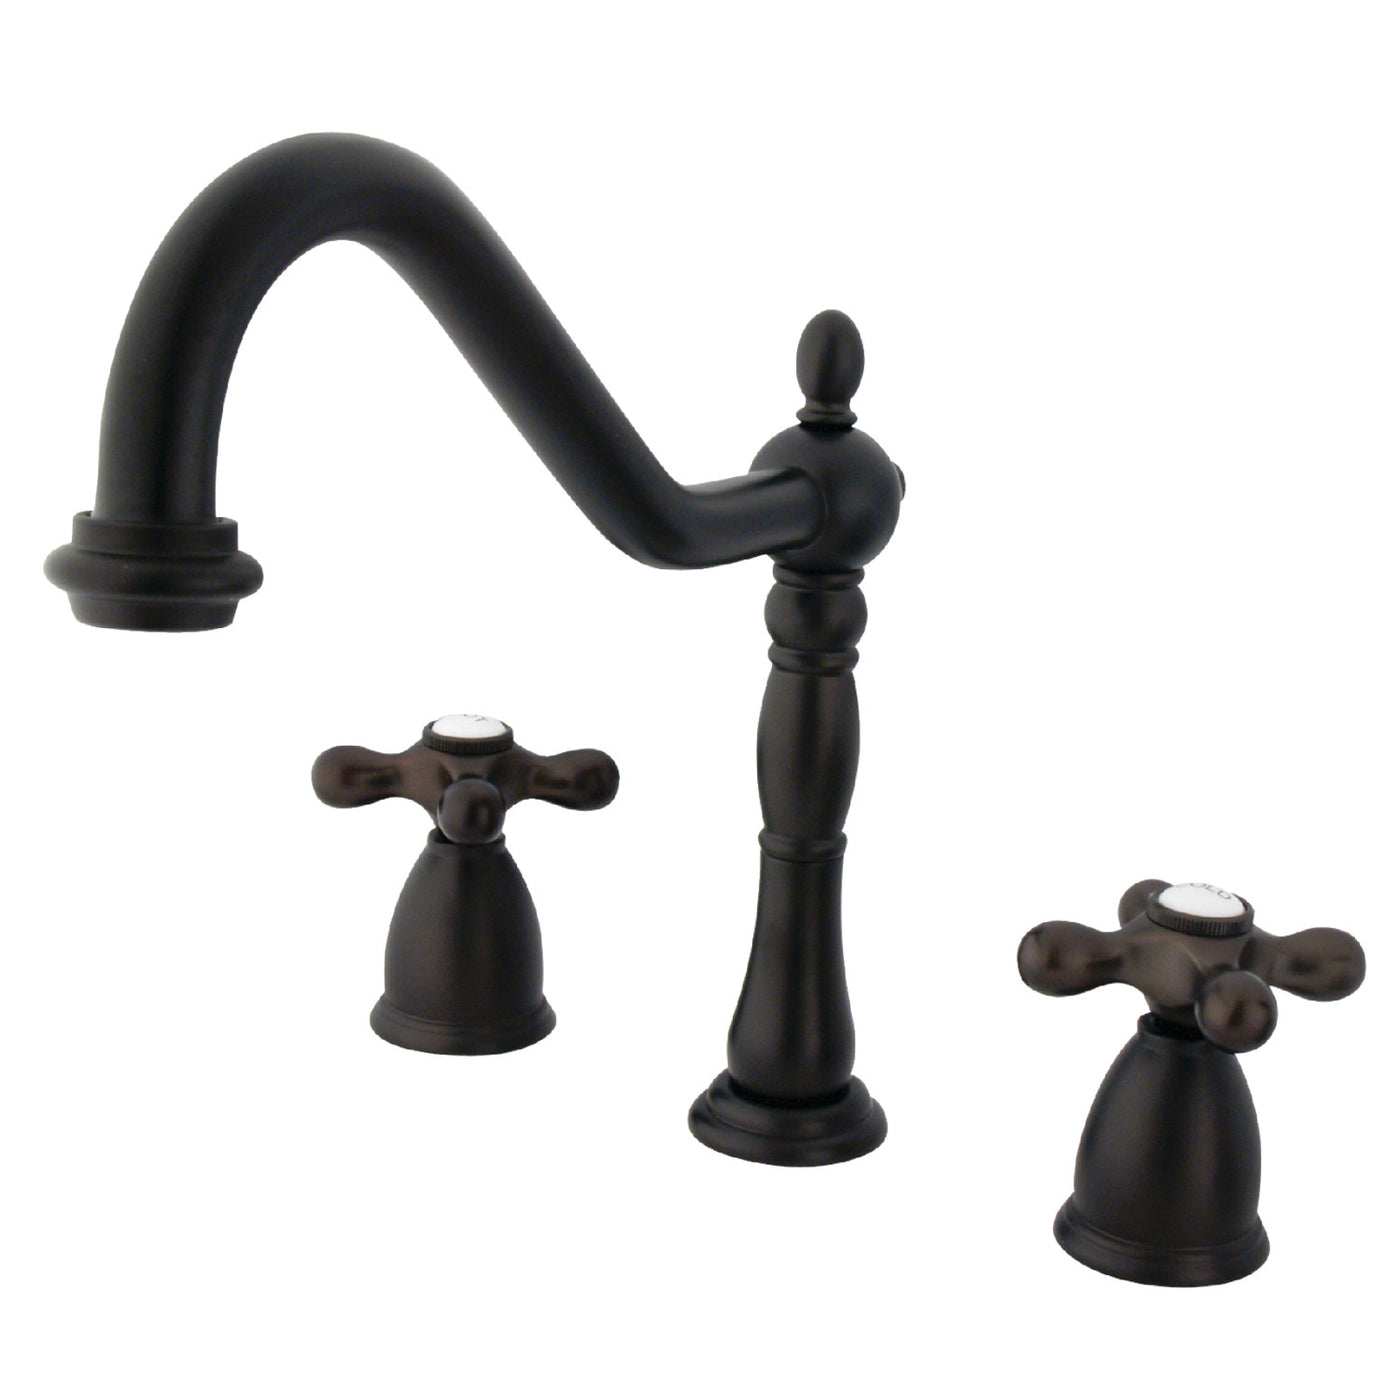 Elements of Design EB1795AXLS Widespread Kitchen Faucet, Oil Rubbed Bronze